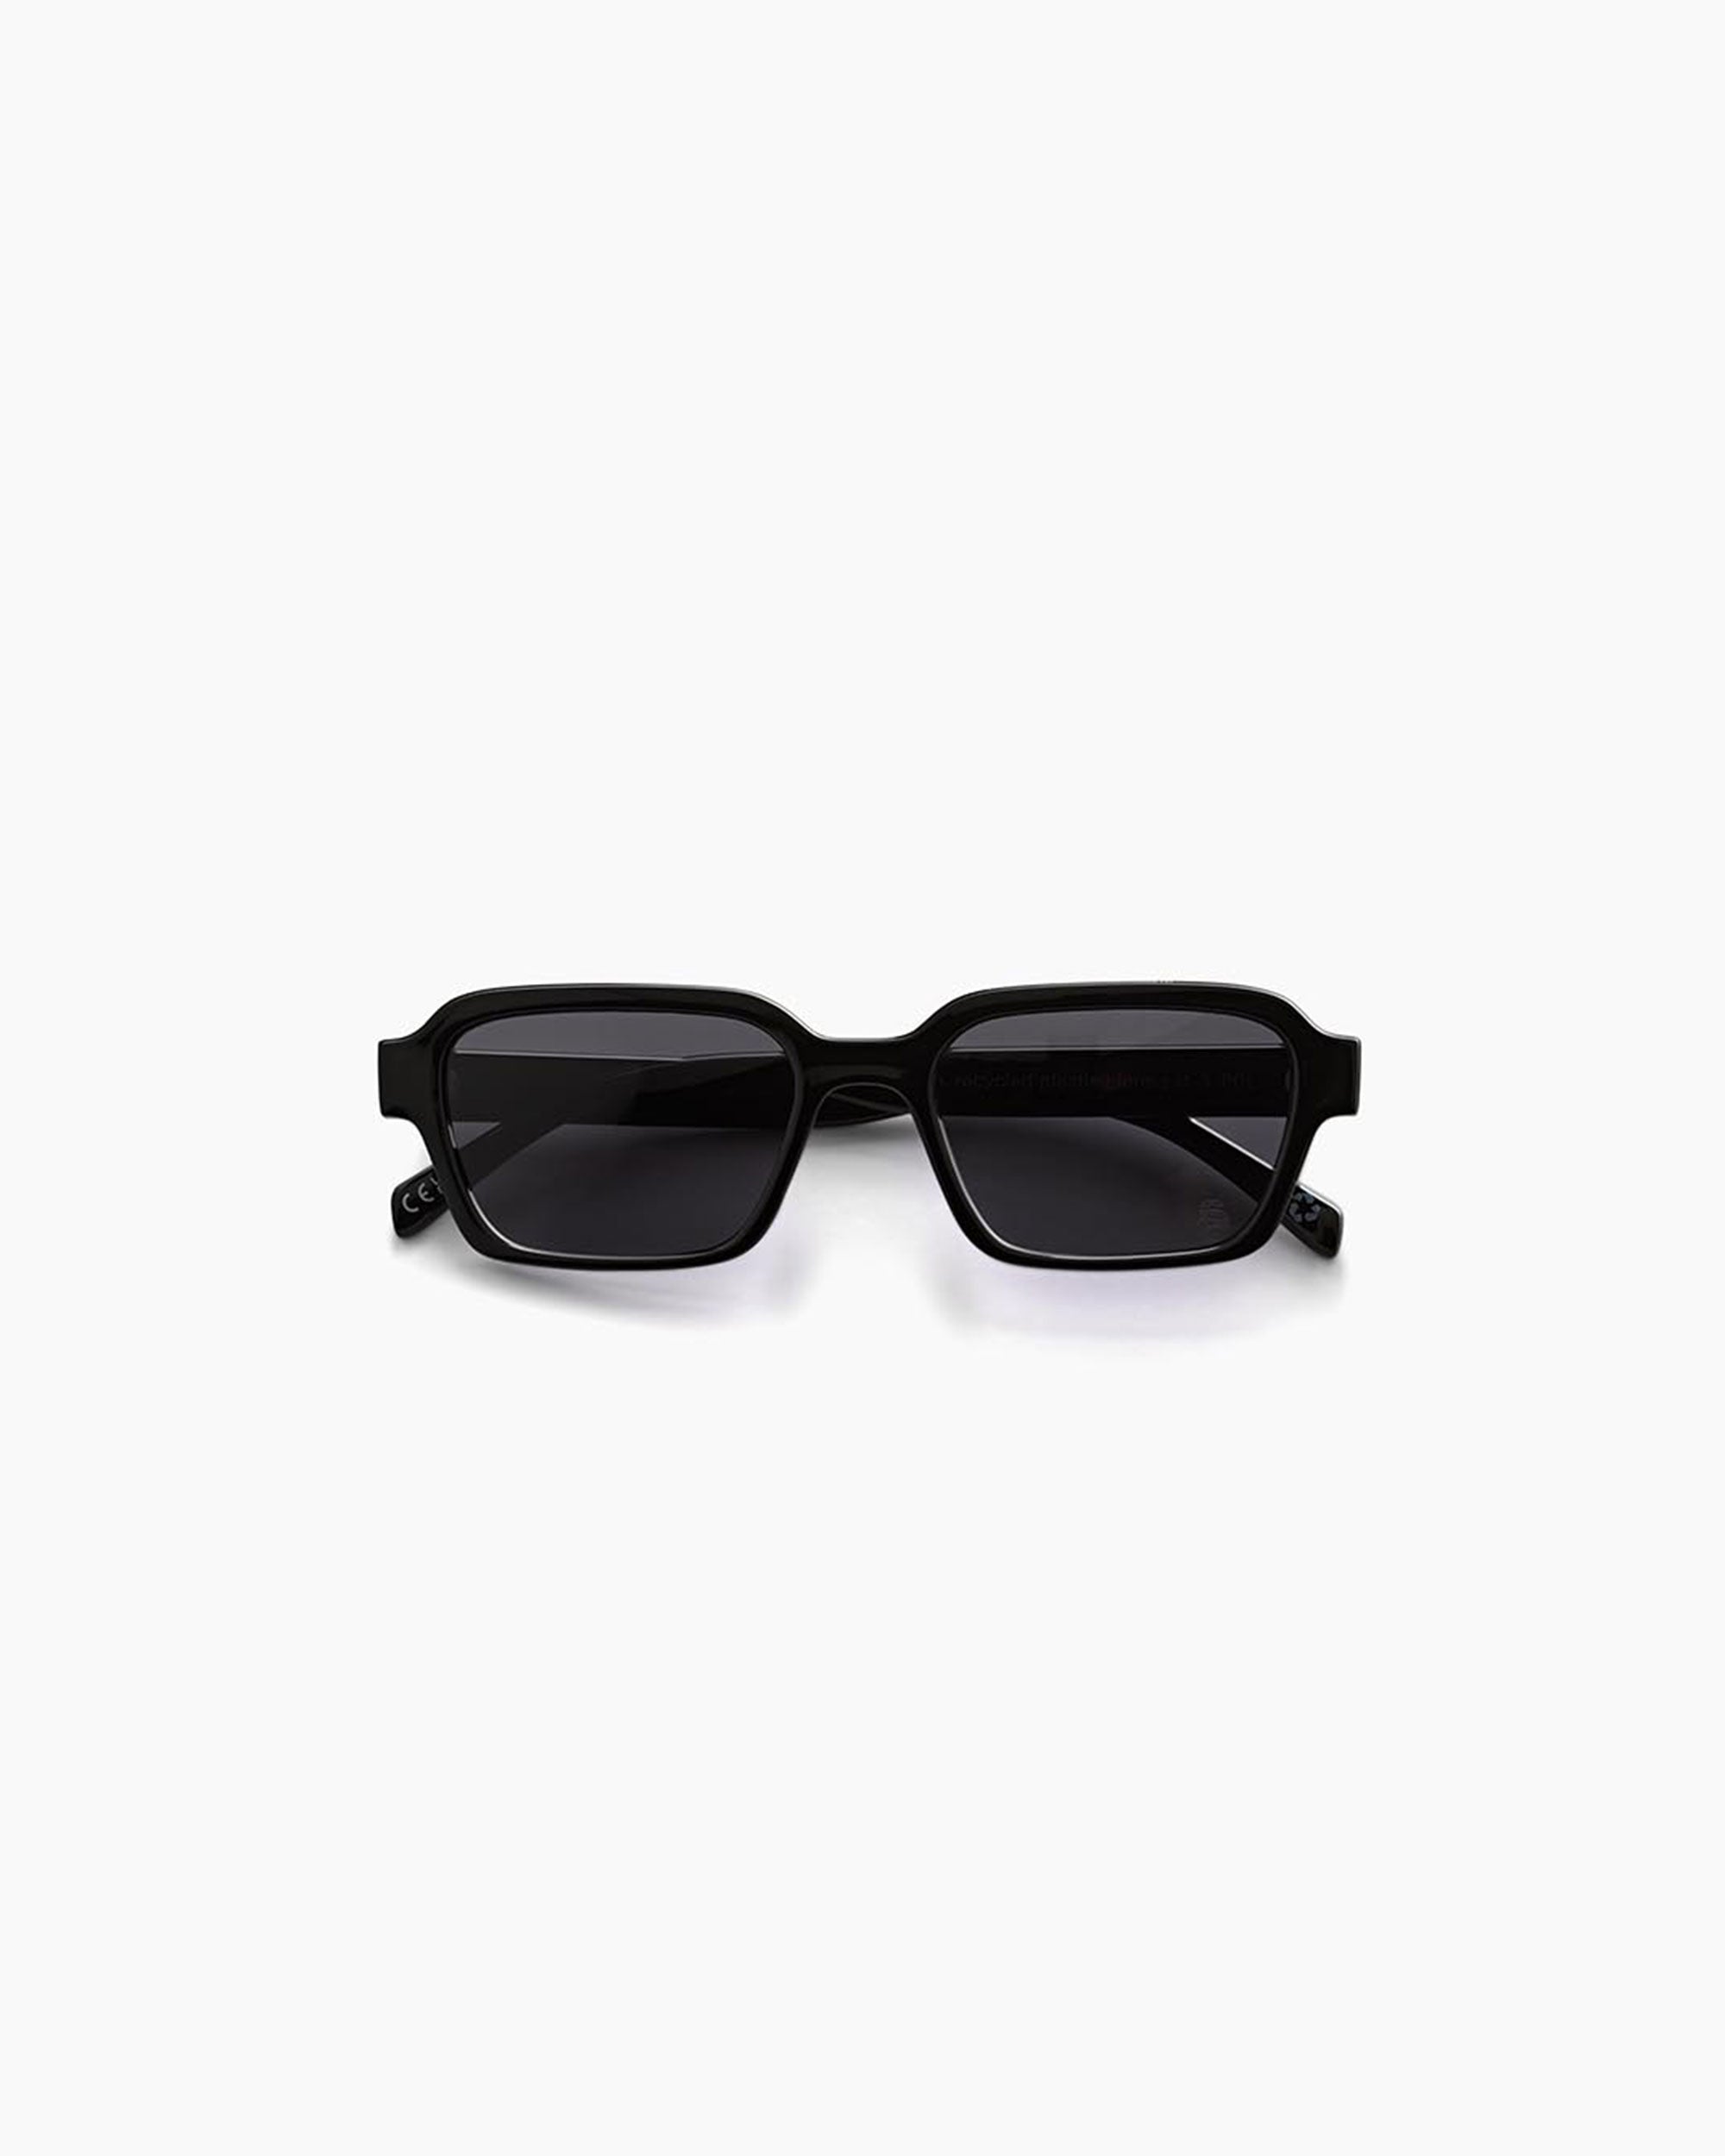 Shop Szade Booth Sunglasses in Double Black Online | Szade Recycled AU